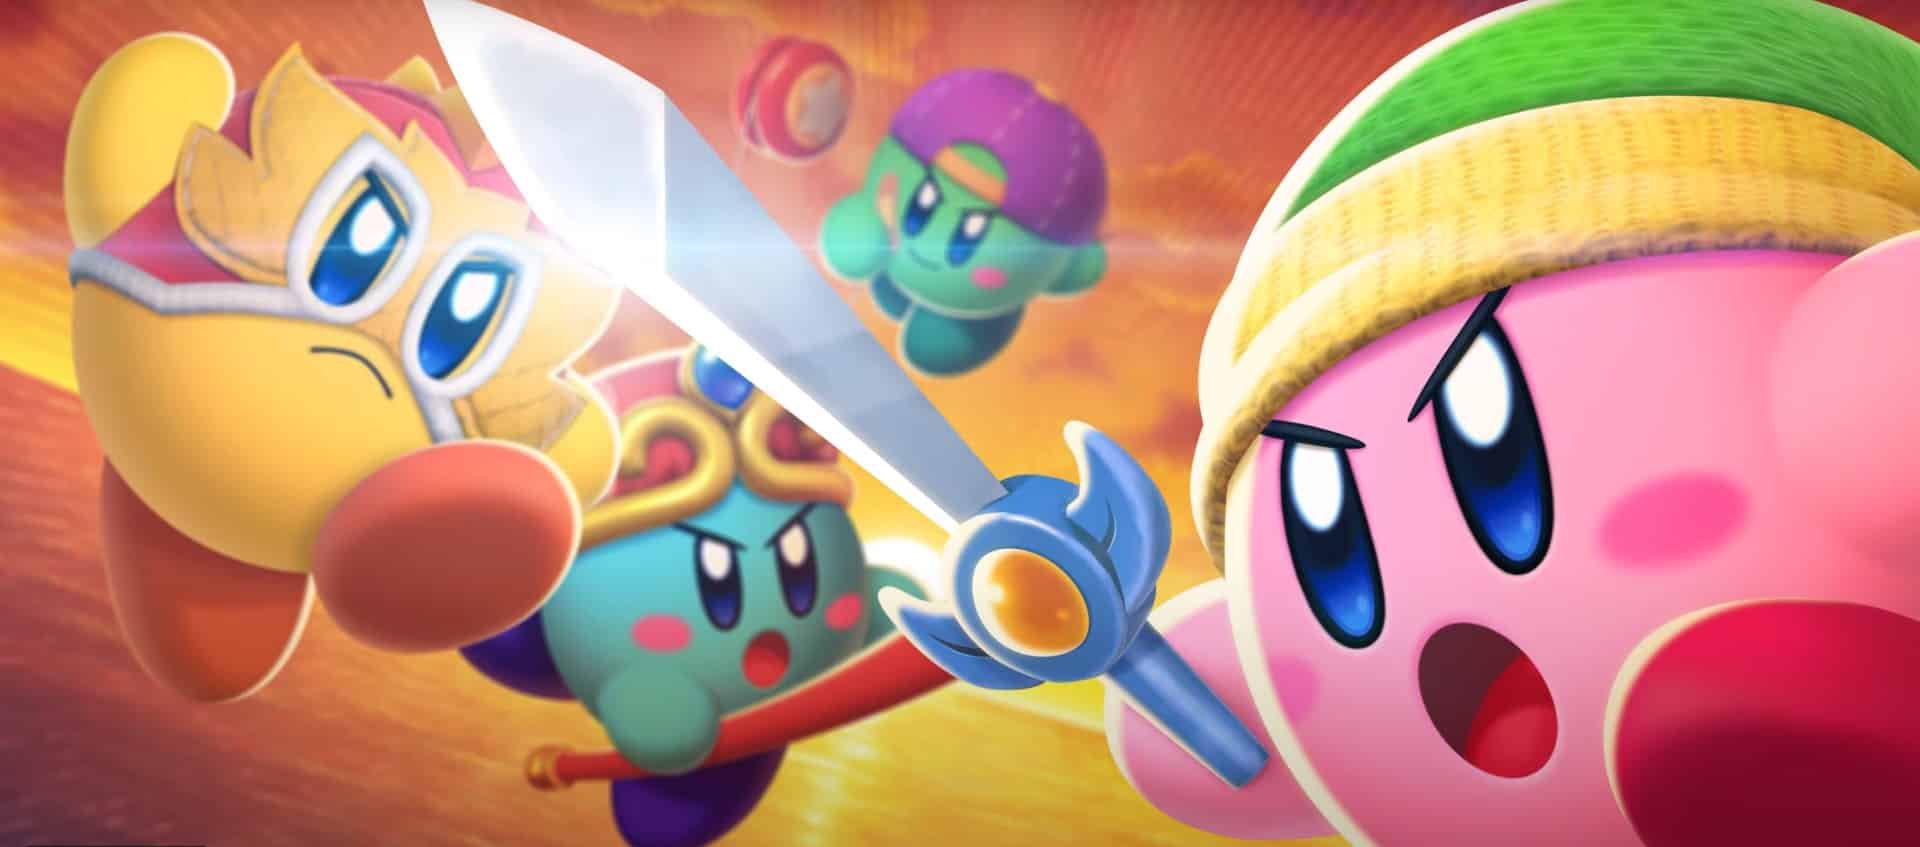 kirby fighters deluxe switch